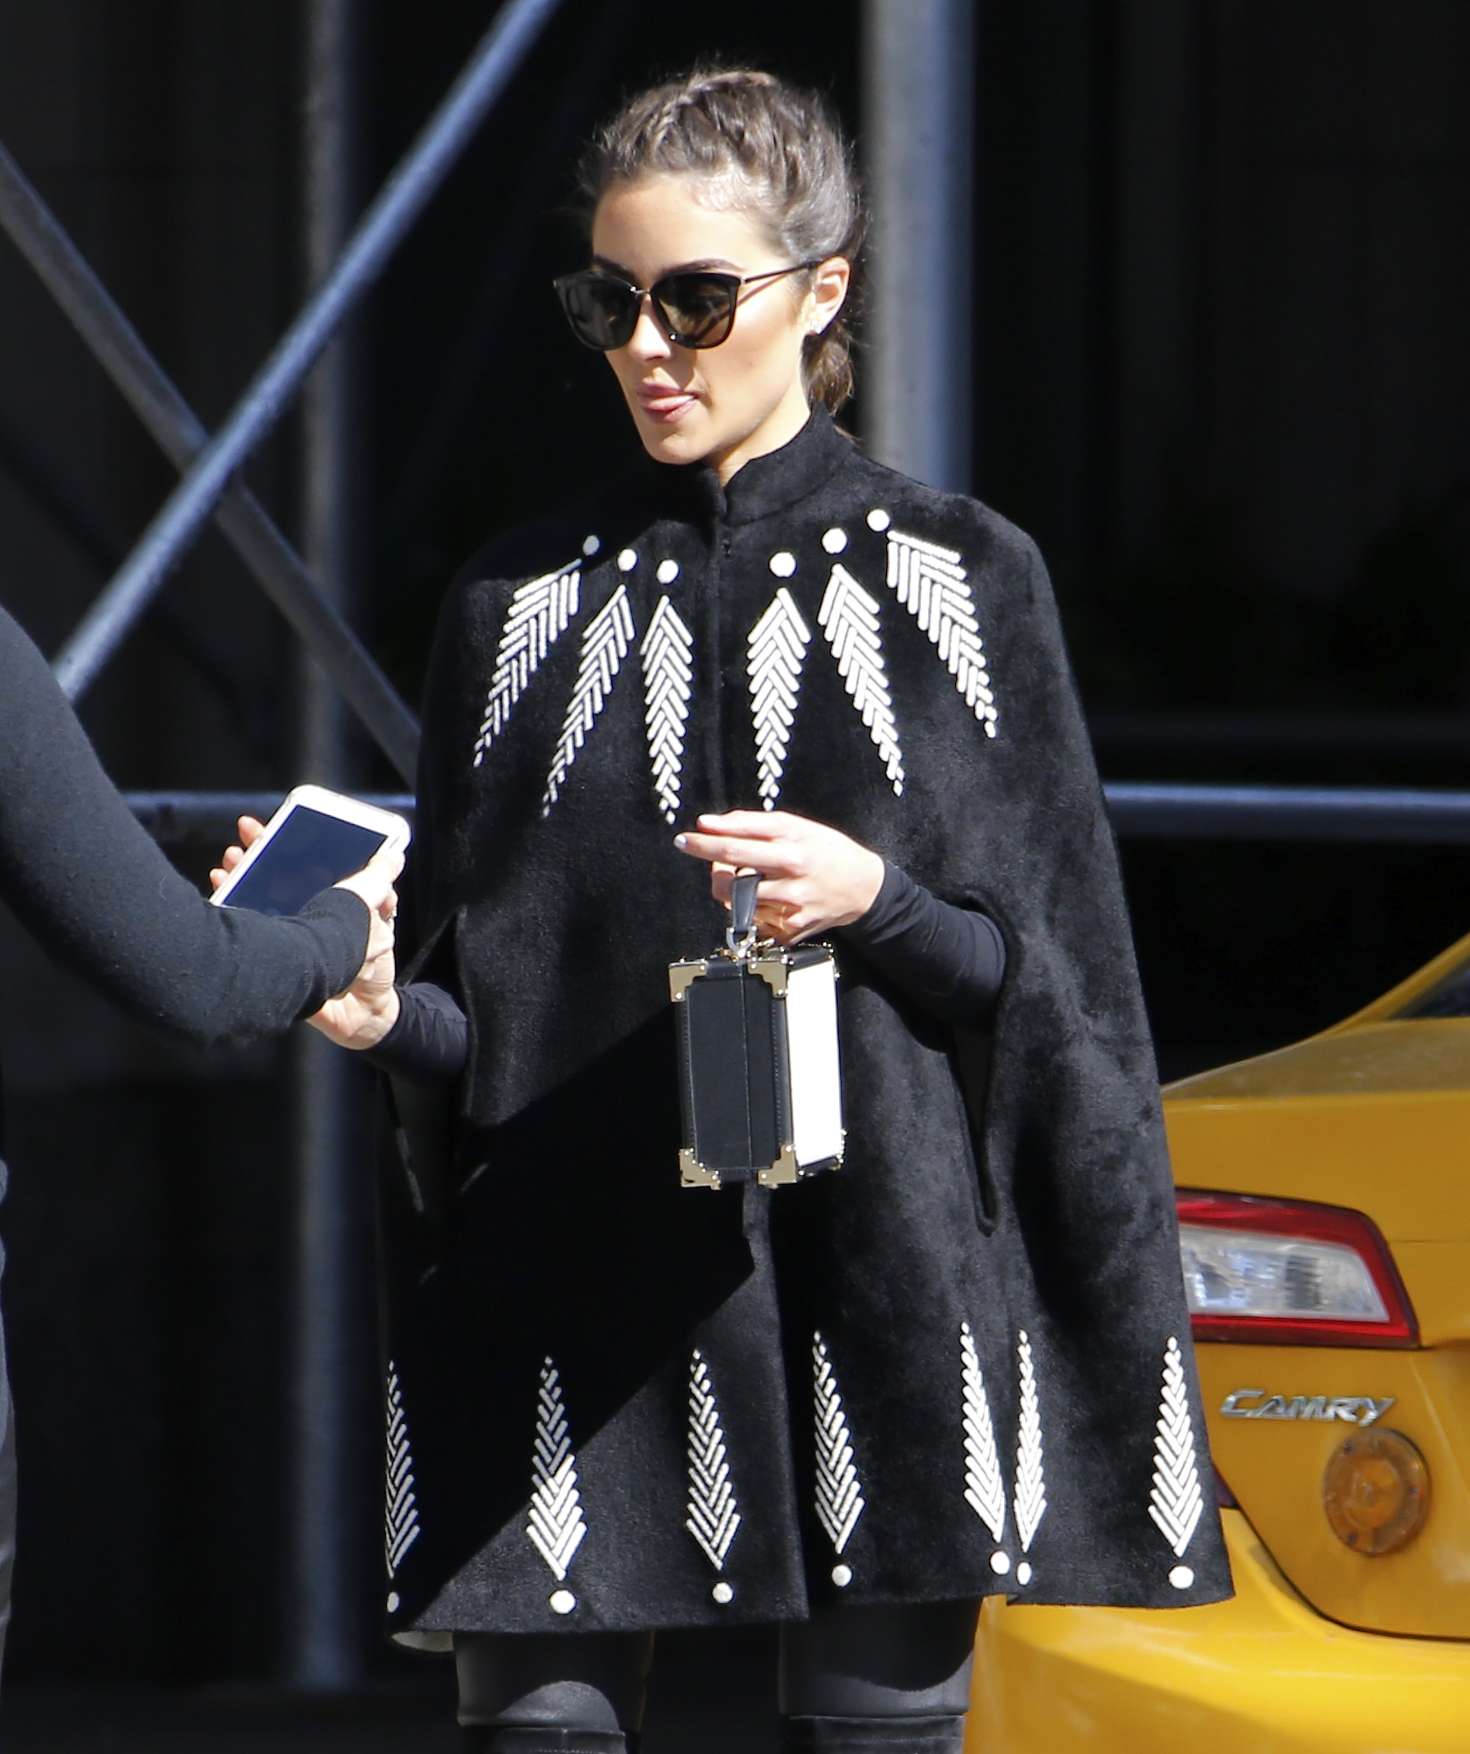 Olivia Culpo on a photoshoot in NYC